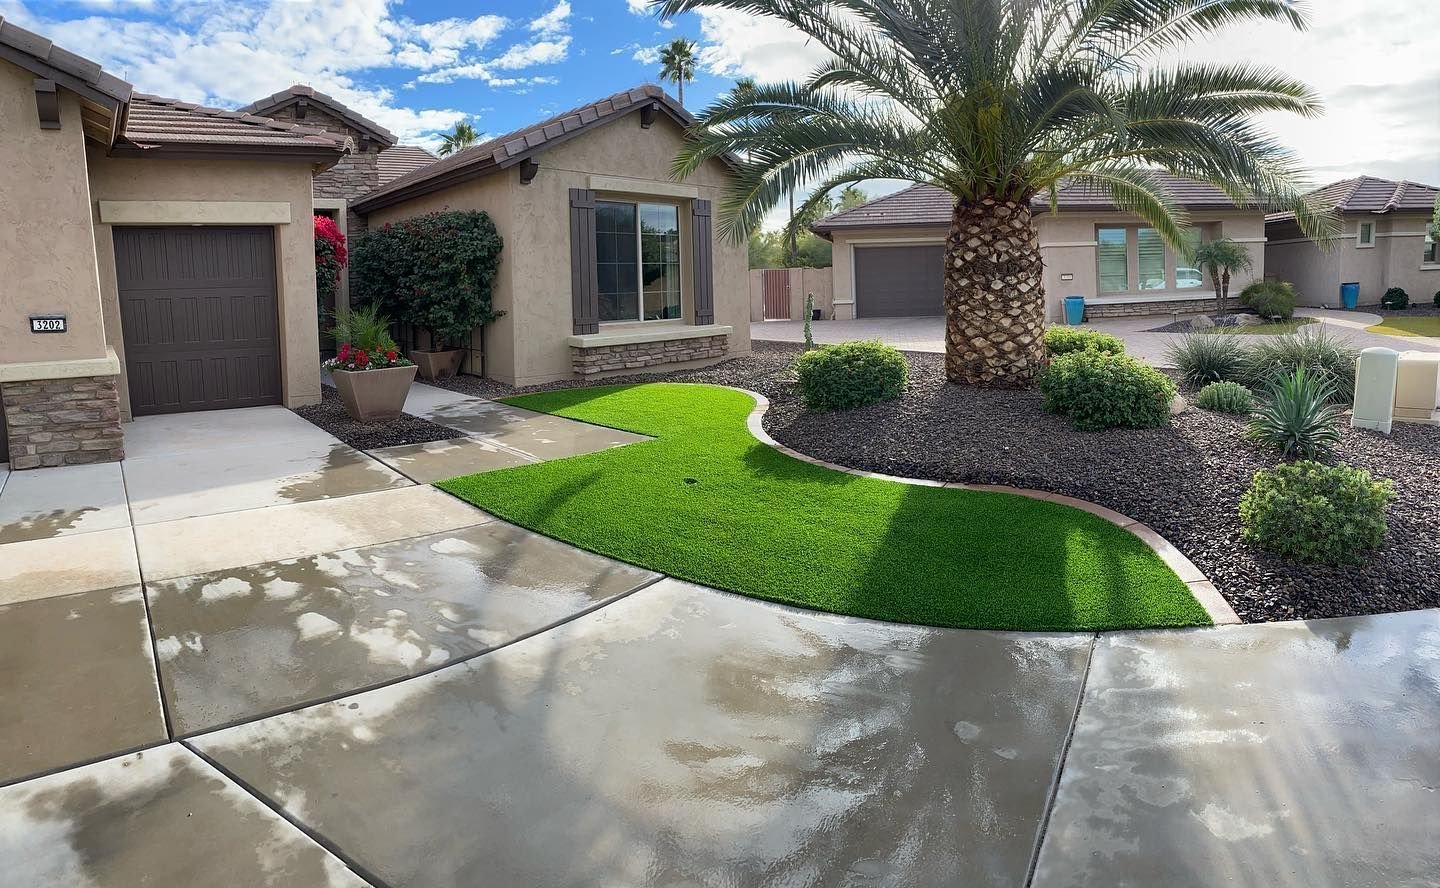 A modern suburban house with beige walls and a brown roof, featuring a well-maintained front yard with green artificial grass installed by licensed turf pros, a palm tree, and desert landscaping. The driveway and walkway are wet, suggesting recent rain or watering. Other similar houses are in the background.